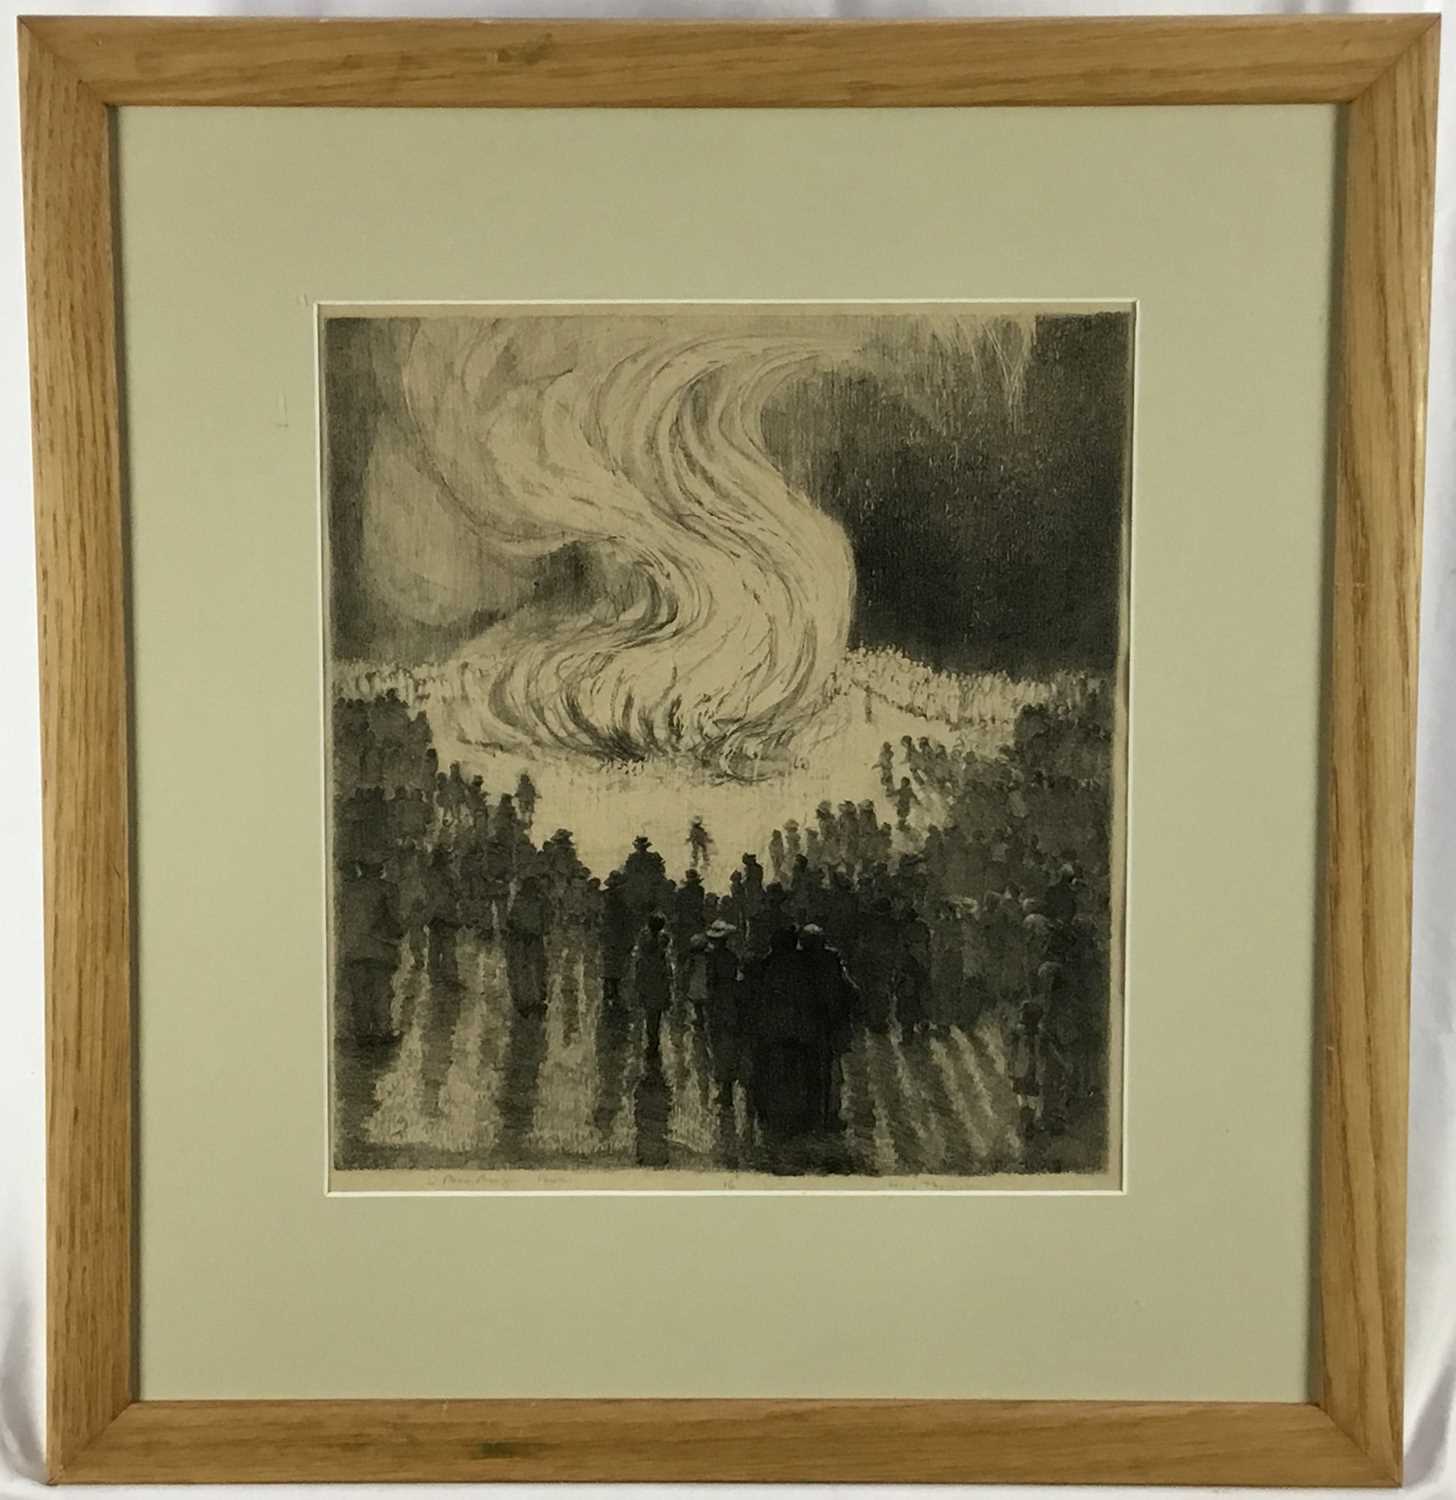 Lot 20 - Louis Thomson (1883-1962) pair of signed lithographs - ‘A Peace Bonfire’ 29cm x 32cm and ‘An Open Air Circus’ 32cm x 27cm in glazed frames